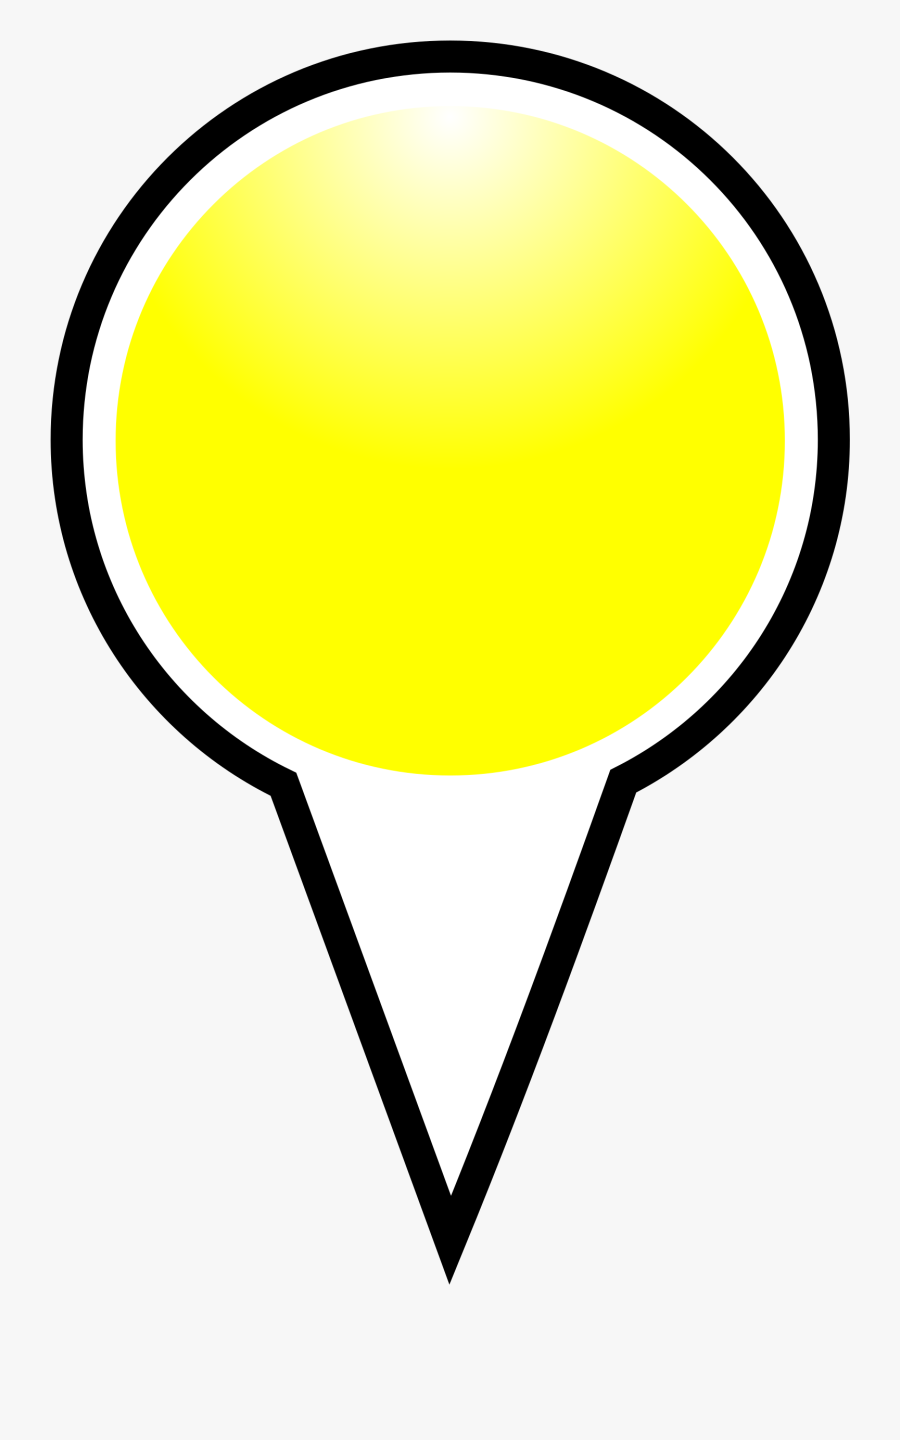 Squat Marker Yellow - Pin Marker Yellow Png, Transparent Clipart